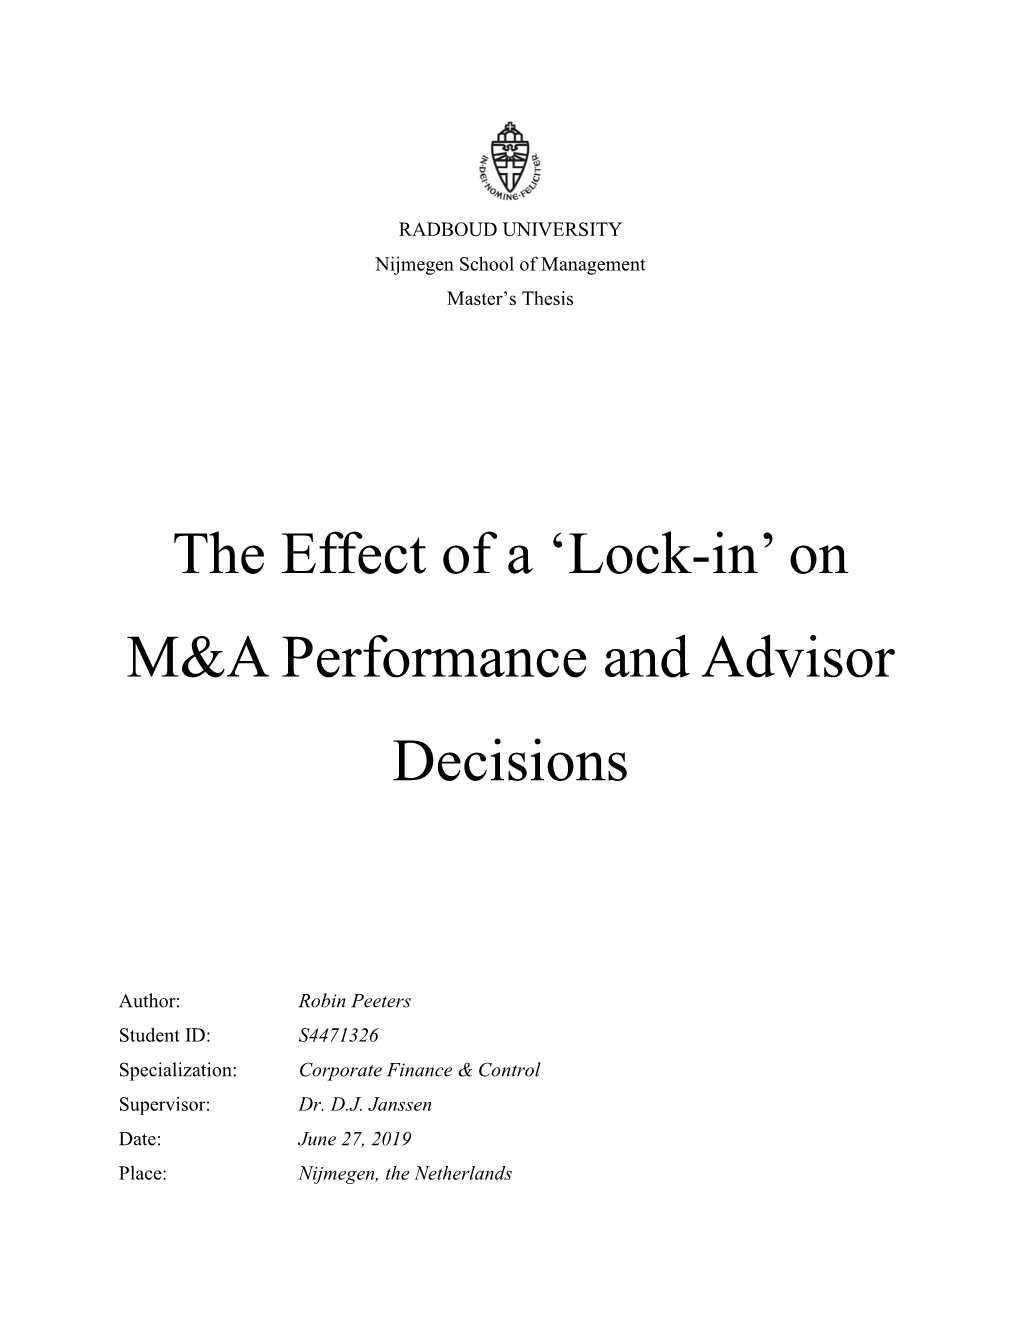 The Effect of a 'Lock-In' on M&A Performance and Advisor Decisions